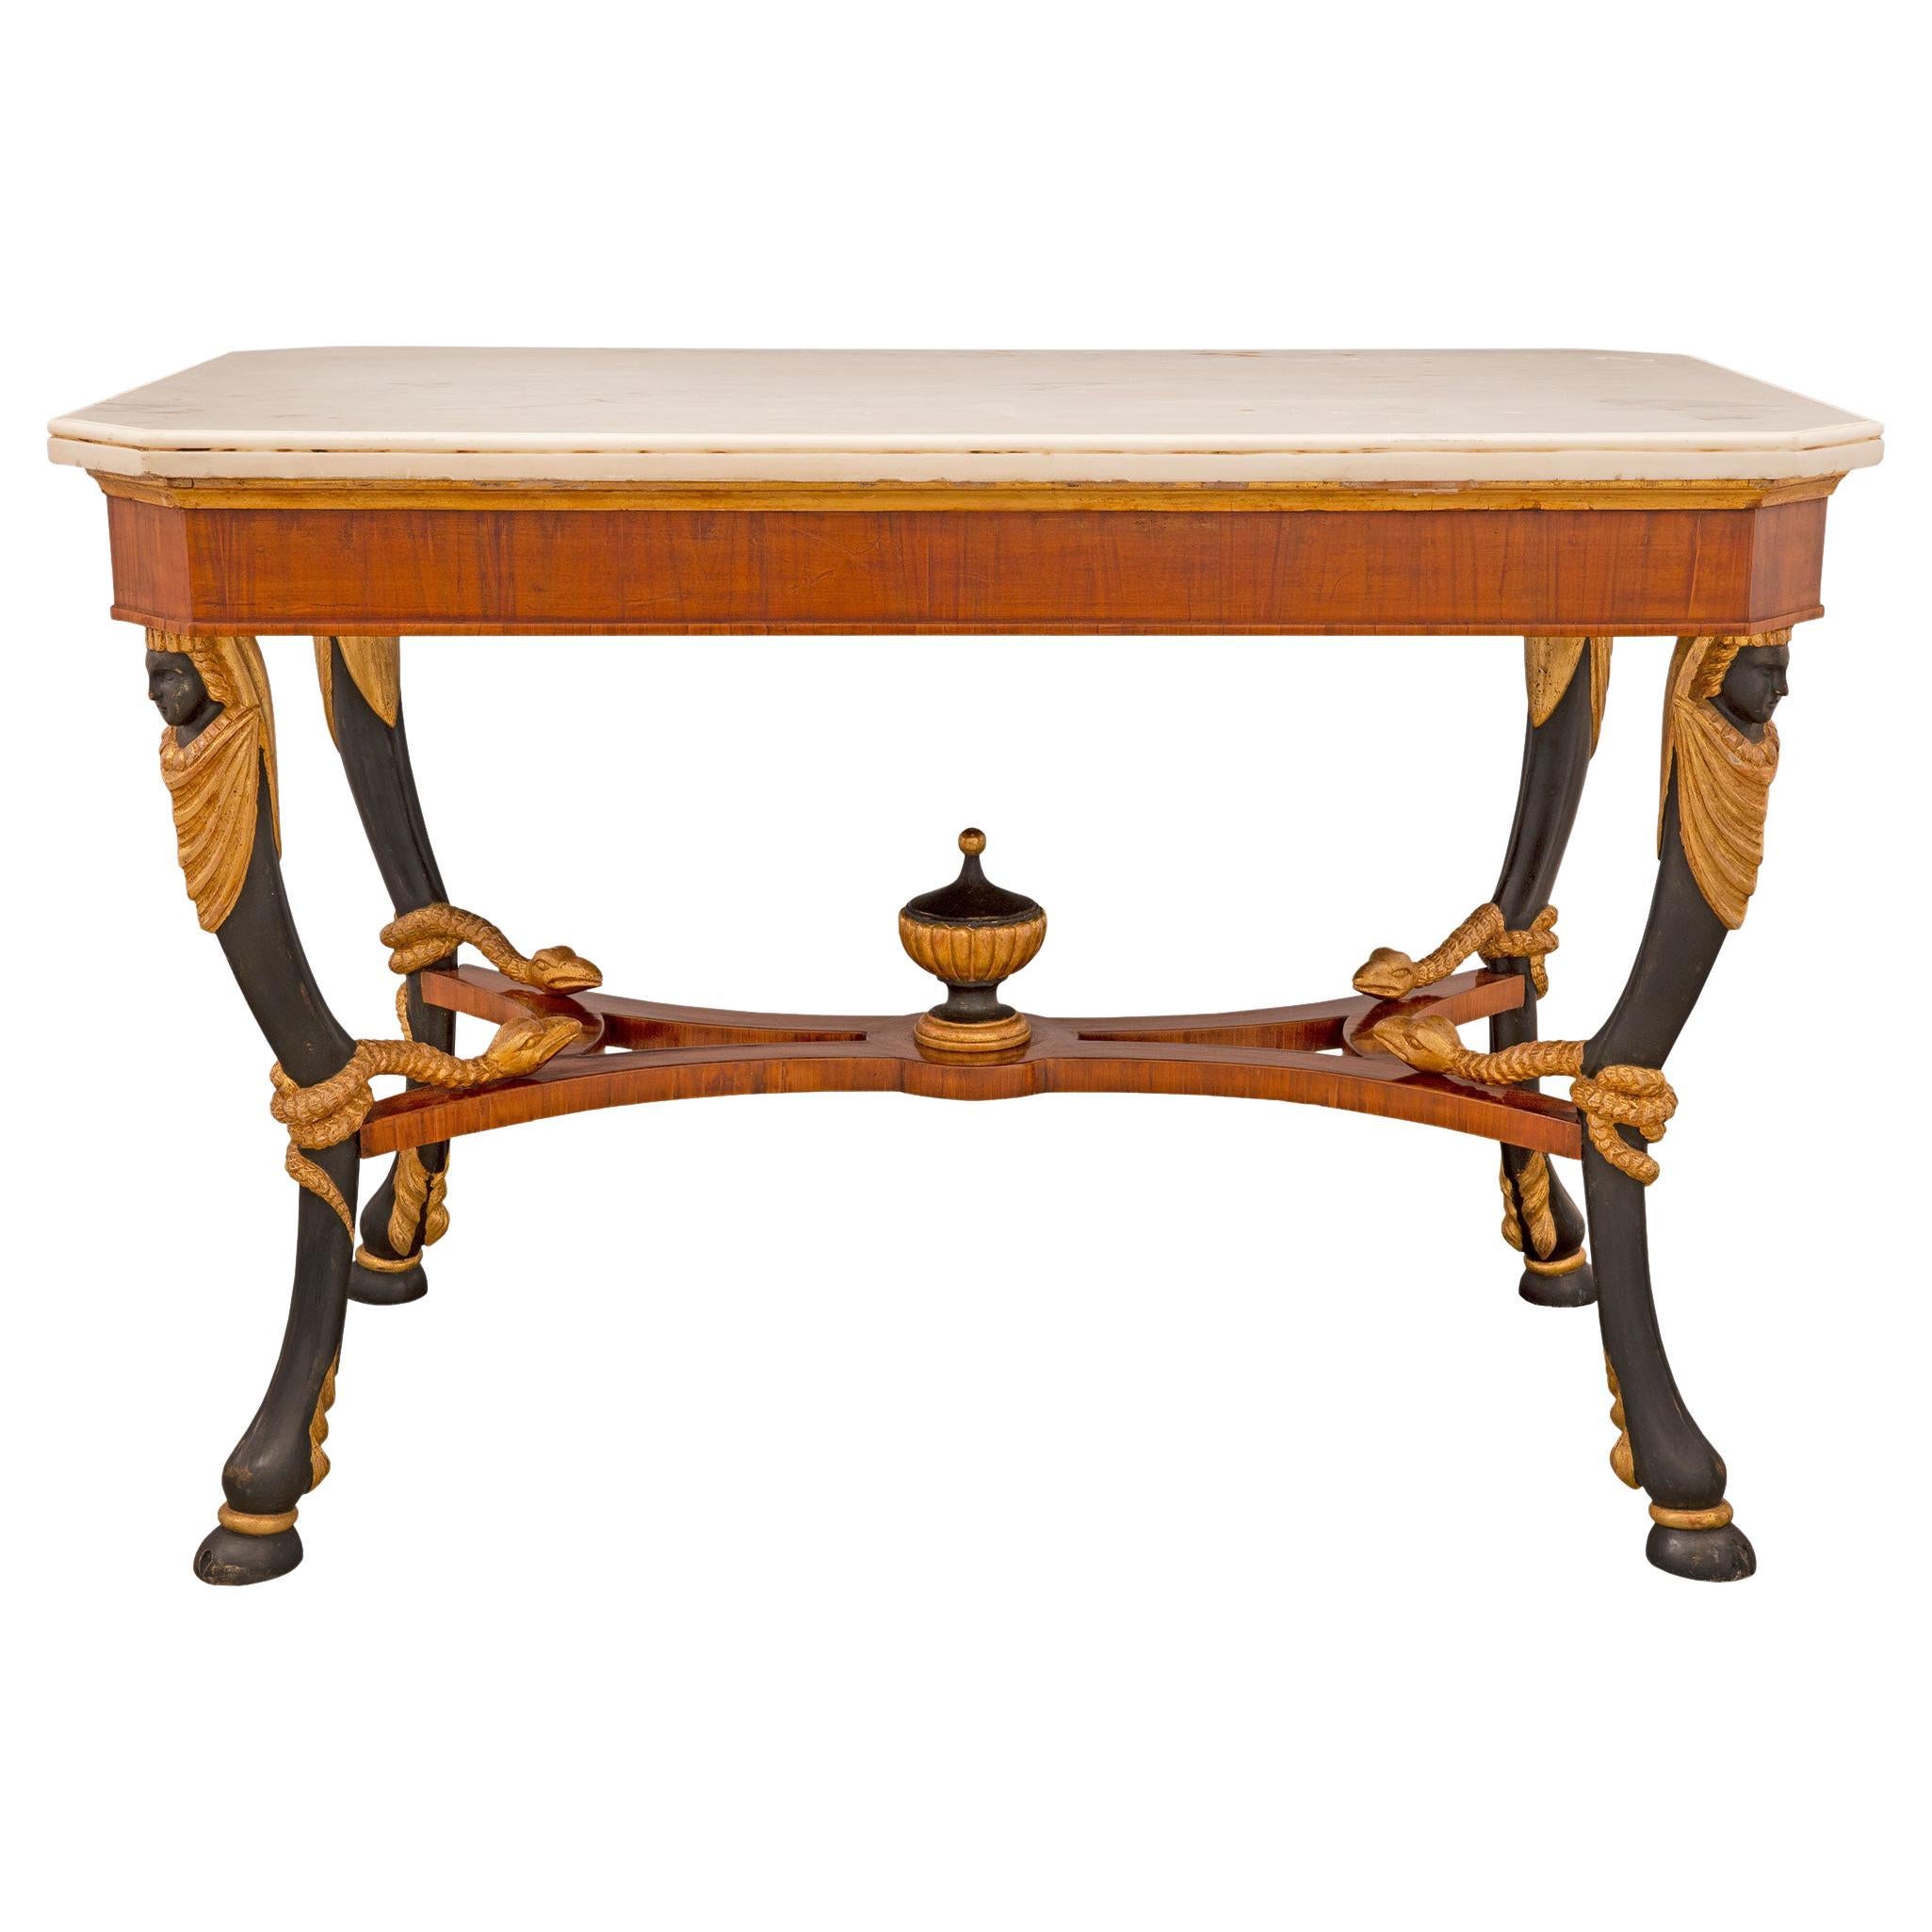 Italian Early 19th Century Neoclassical St. Center Table, from Naples